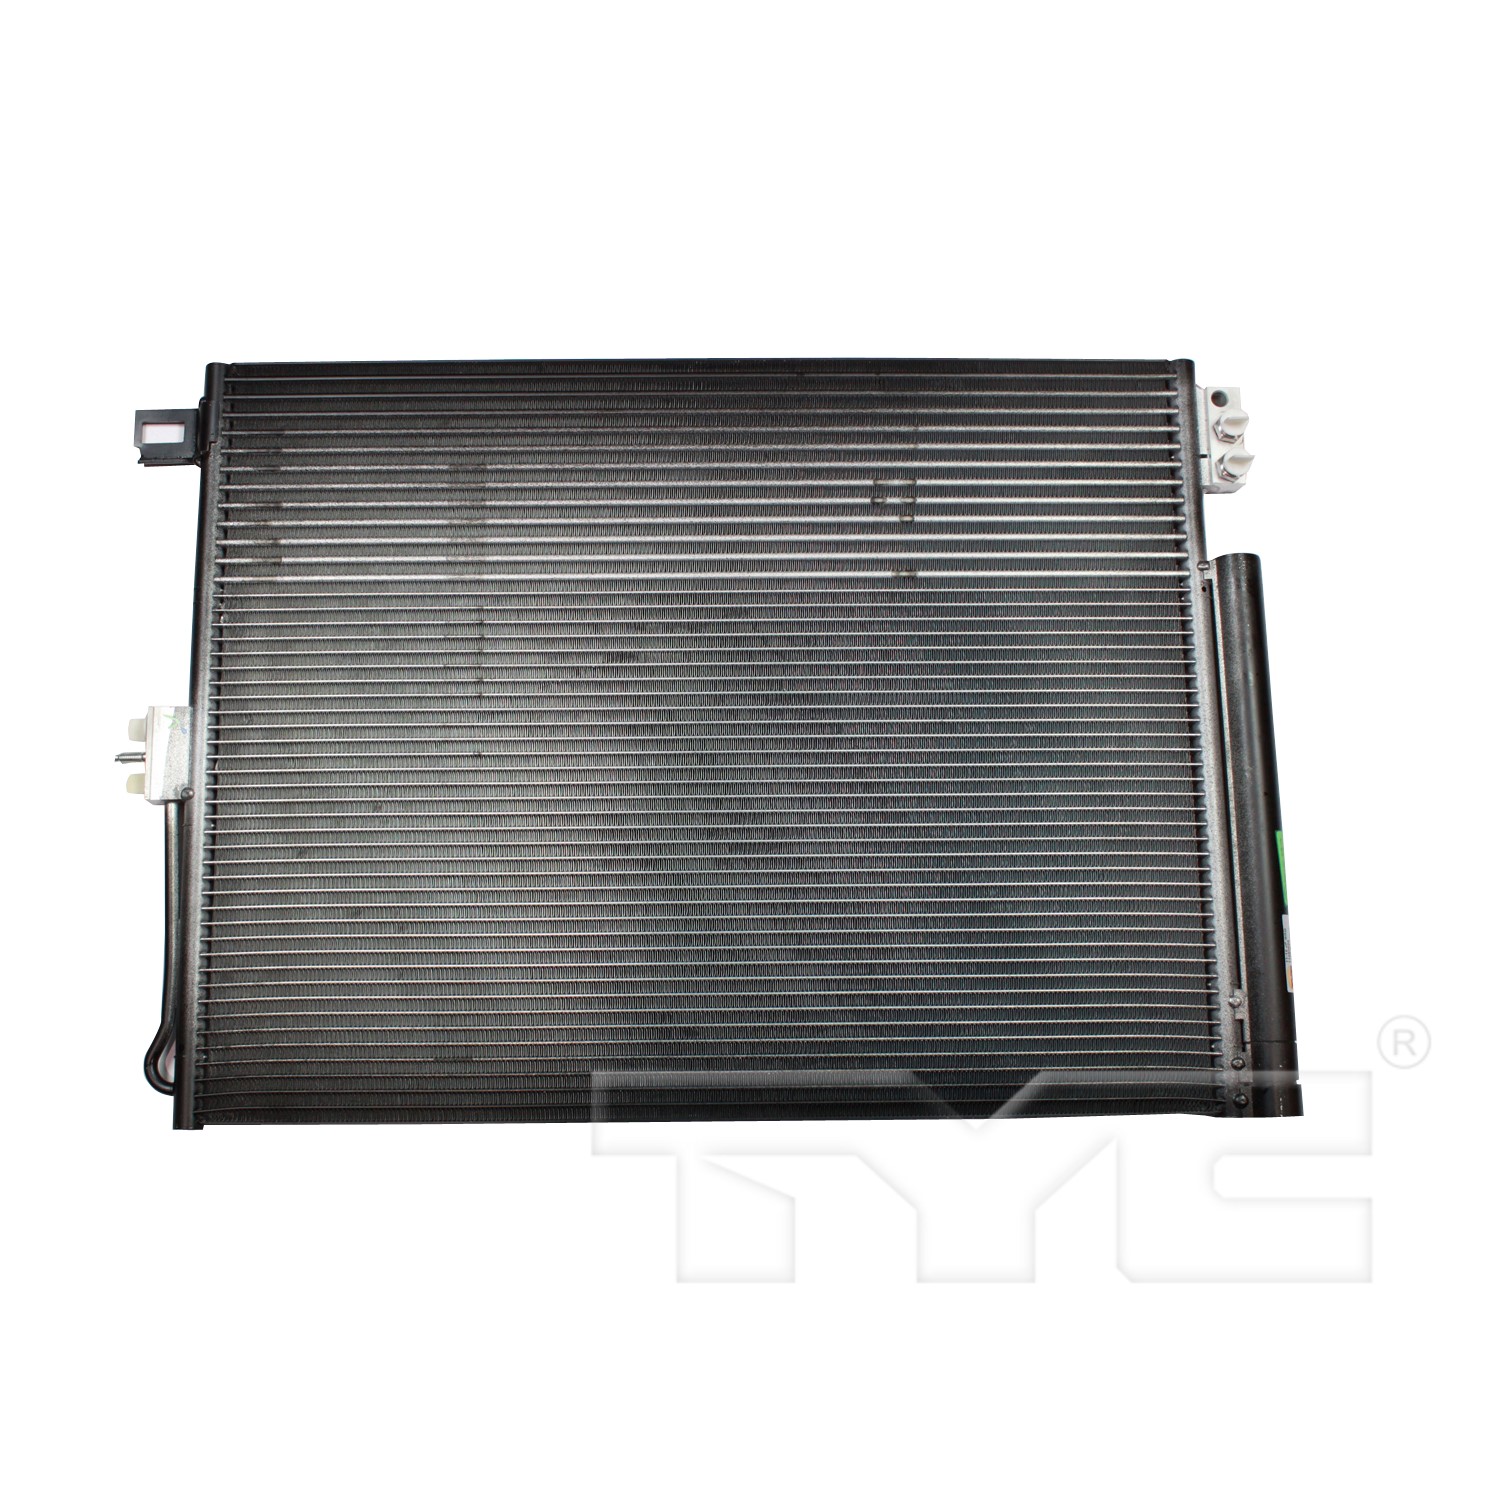 Aftermarket AC CONDENSERS for JEEP - GRAND CHEROKEE, GRAND CHEROKEE,11-21,Air conditioning condenser